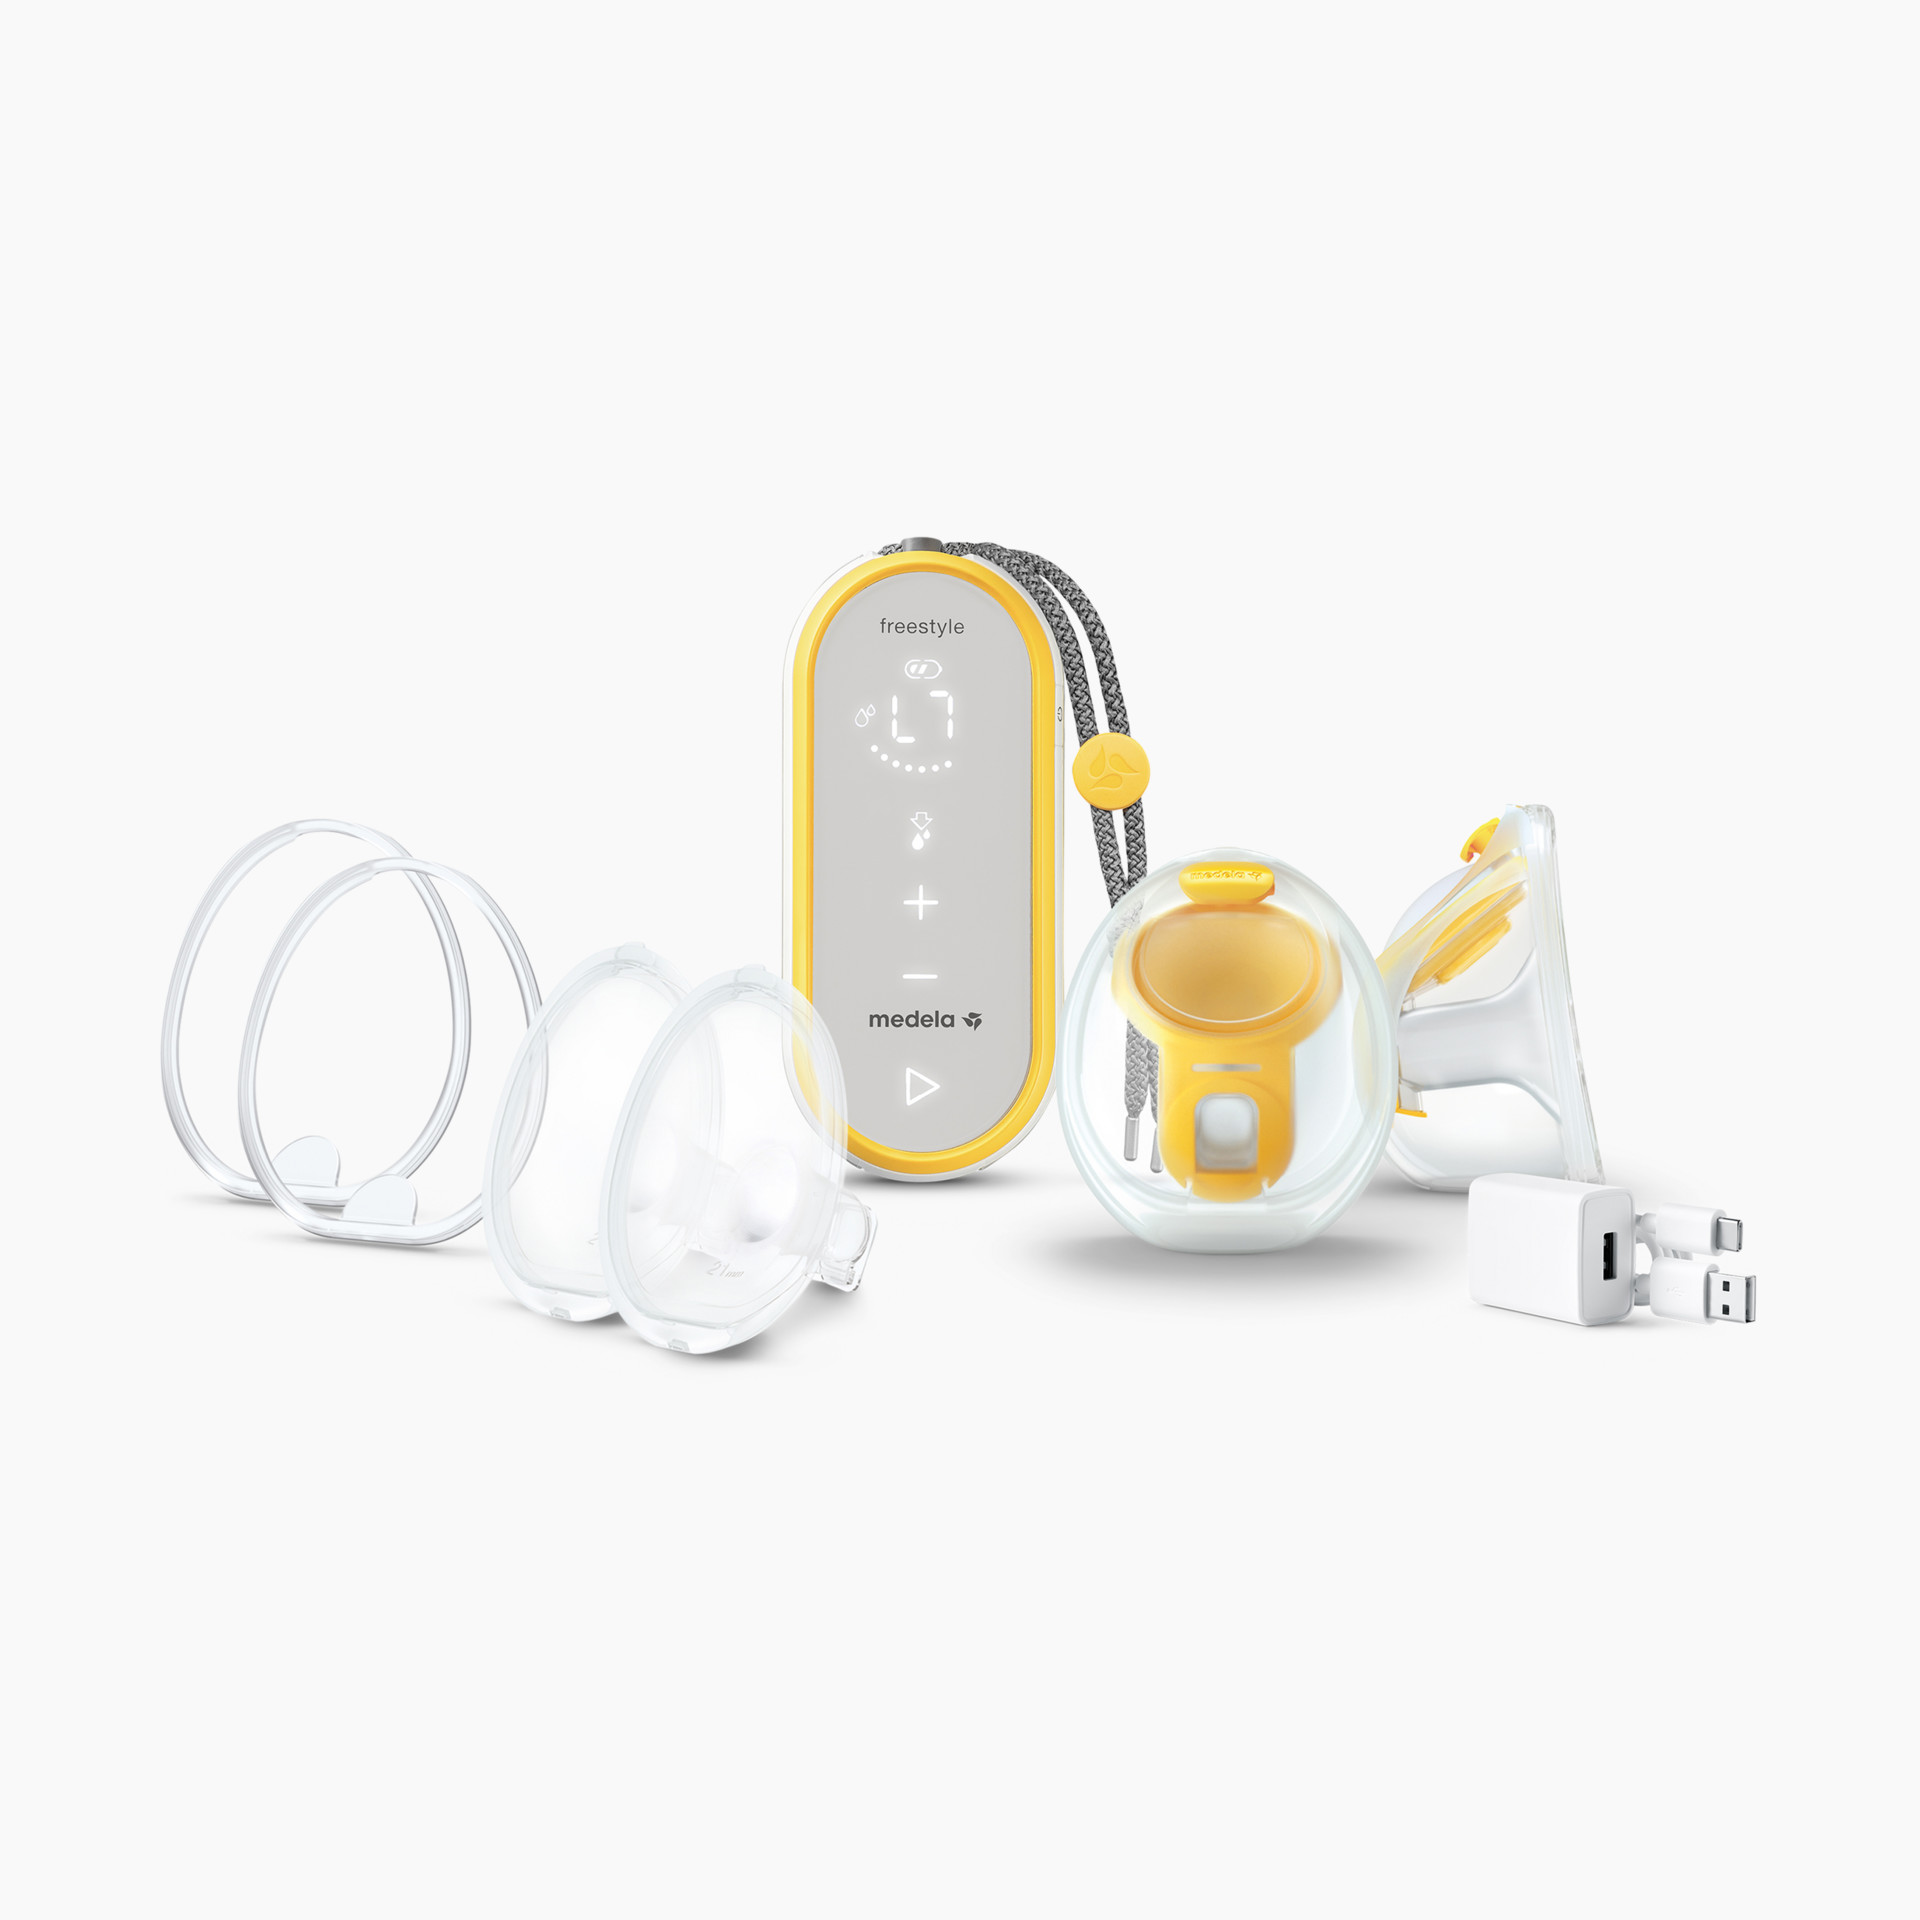 Using the Medela® Freestyle Breast Pump